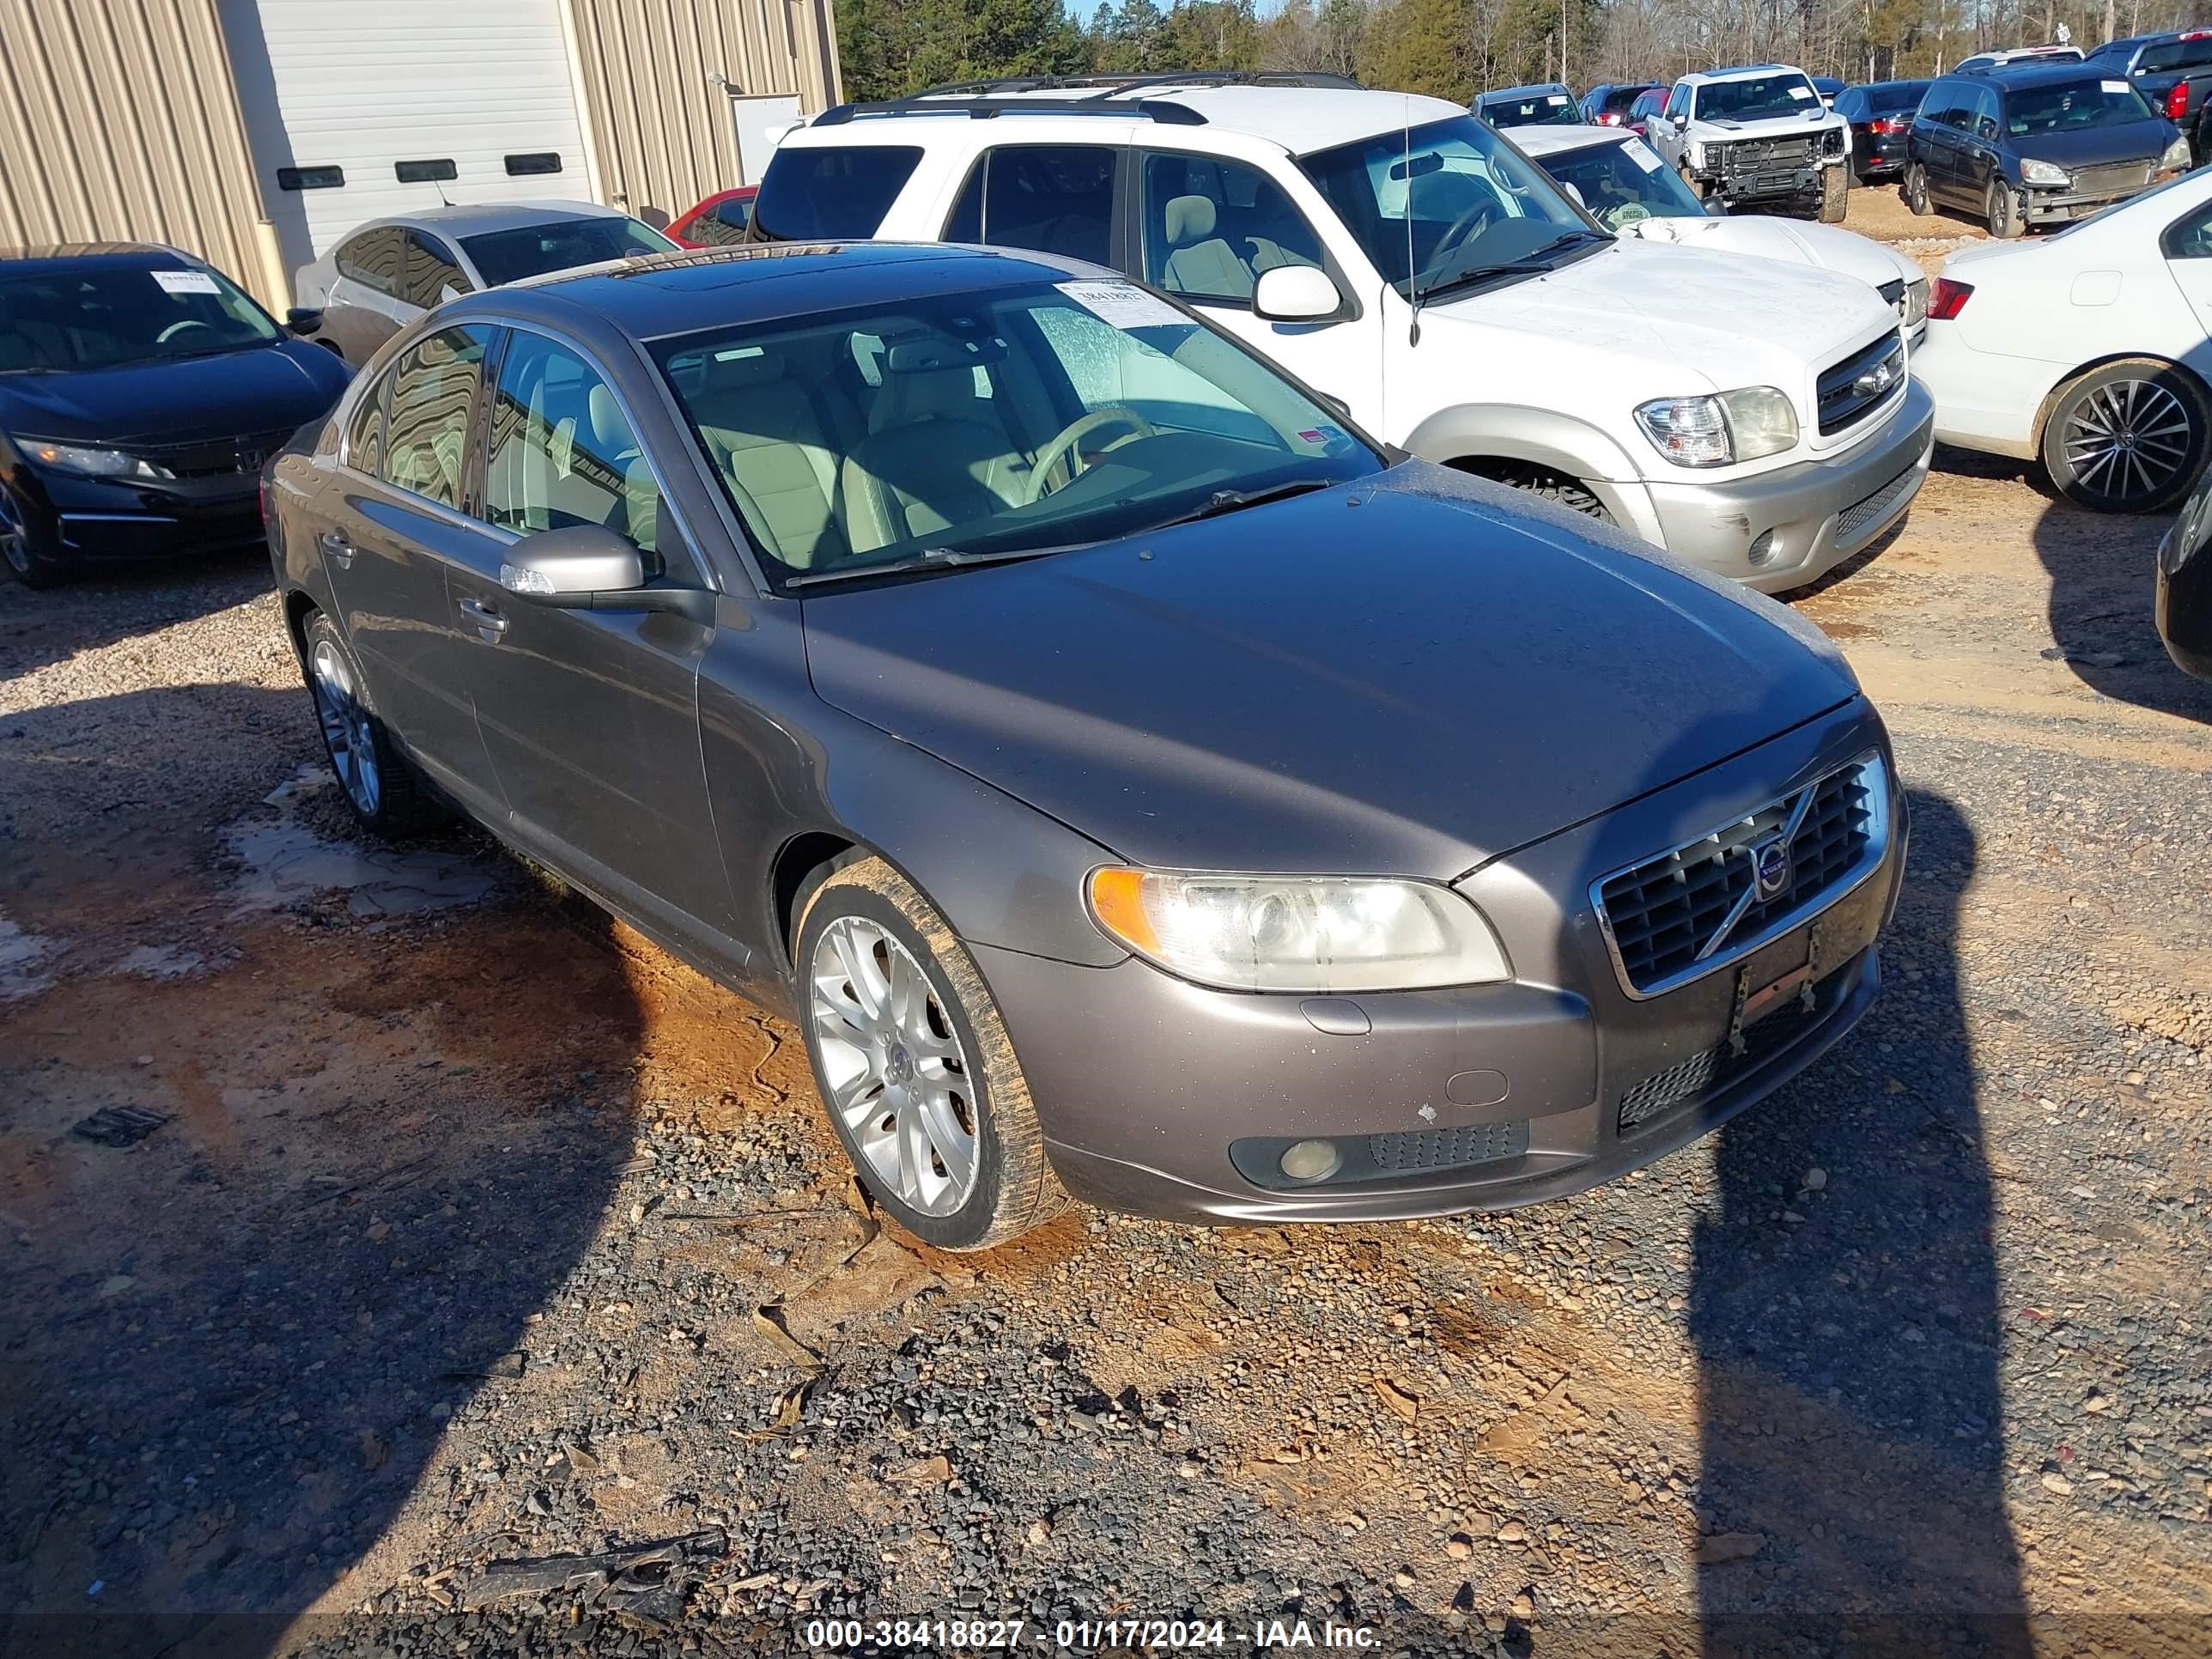 vin: YV1AS982271027157 YV1AS982271027157 2007 volvo s80 3200 for Sale in 28025, 5100 Merle Rd, Concord, North Carolina, USA